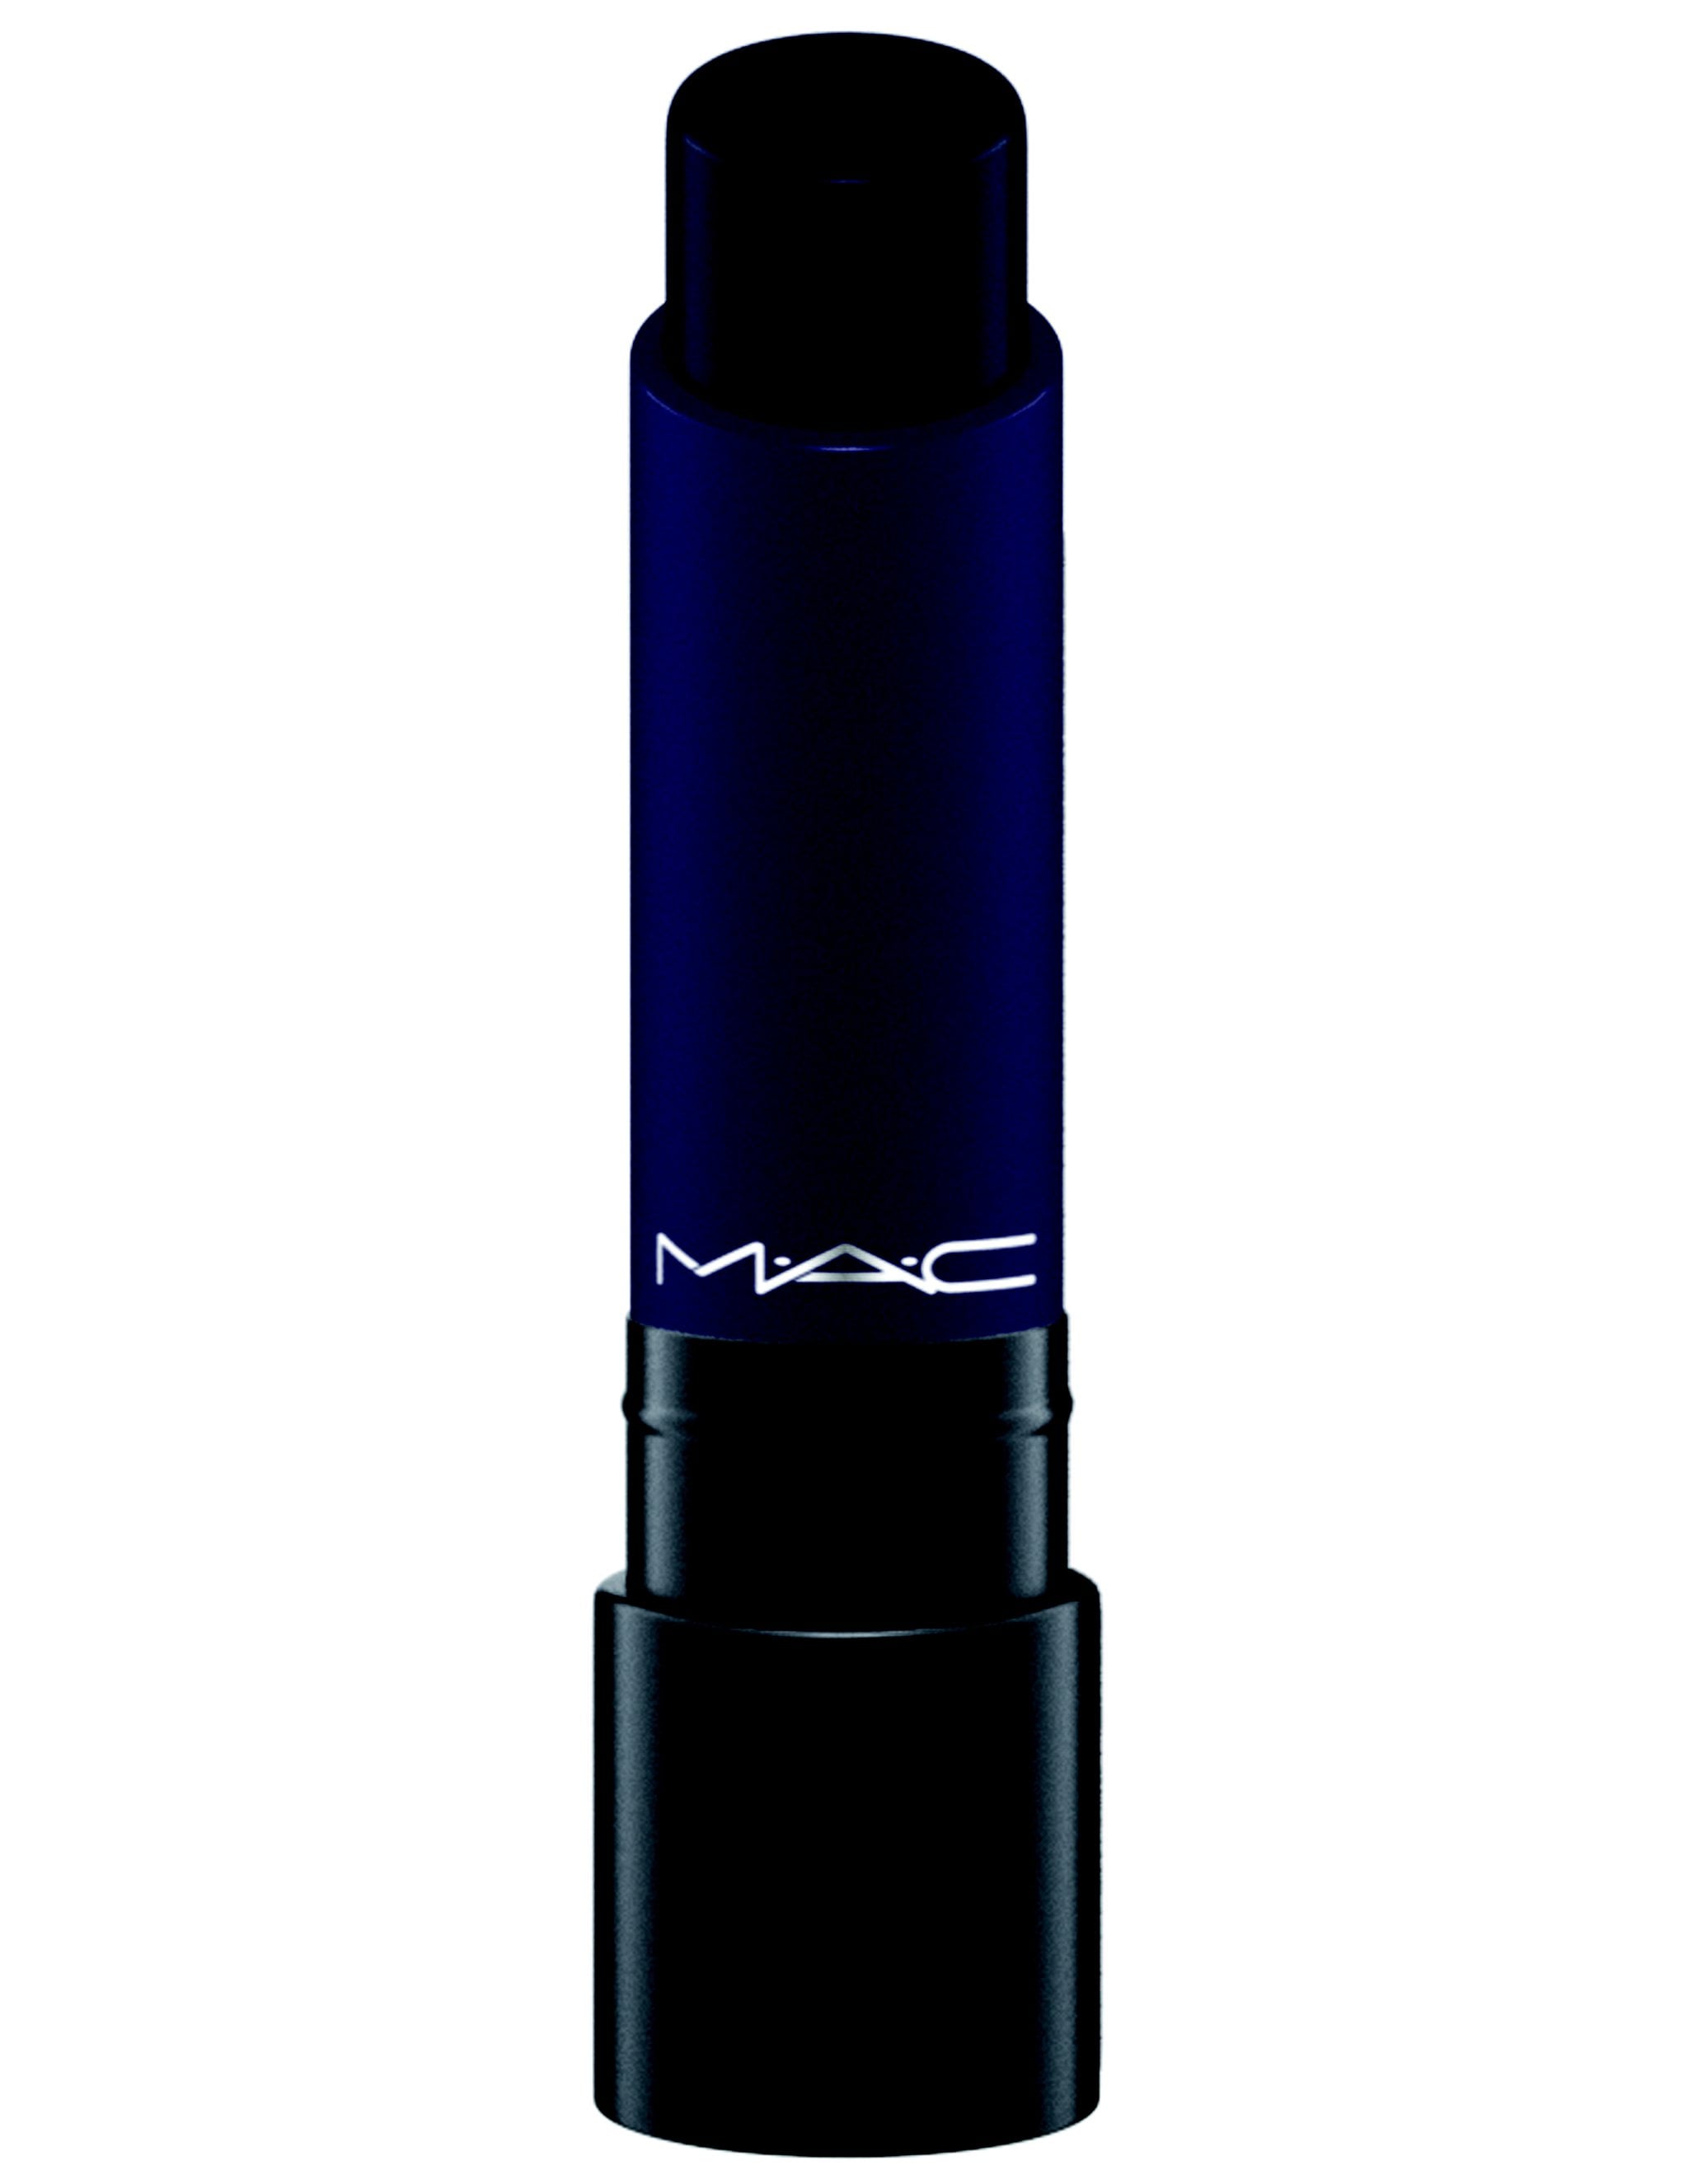 MAC Cosmetics Liptensity Lipstick in Blue Beat | Beauty Launches of 2016 That You Should Have in Your Stash | POPSUGAR Beauty Photo 26